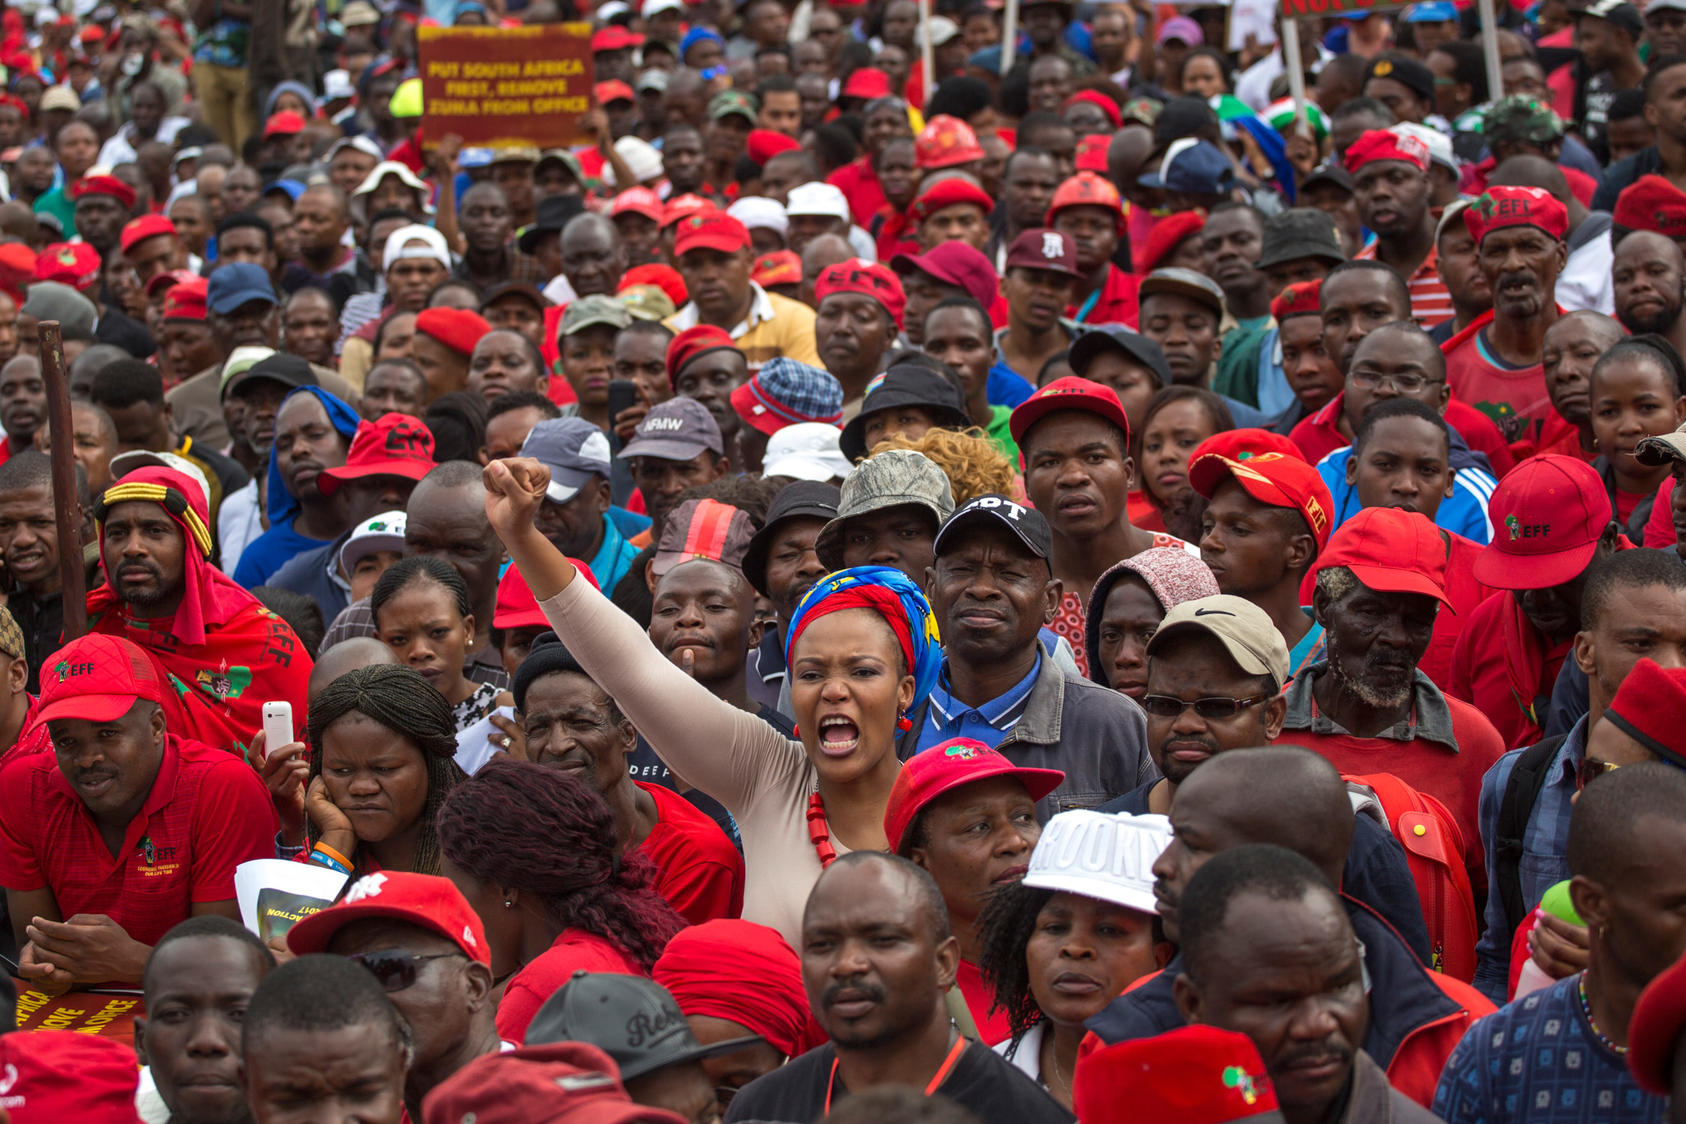 In one of South Africa’s largest protests in years, tens of thousands rallied against Zuma, spurred by the firing of a popular finance minister who was held as a bulwark against corruption and cronyism, April 12, 2017. Photo Courtesy of NYT/Joao Silva